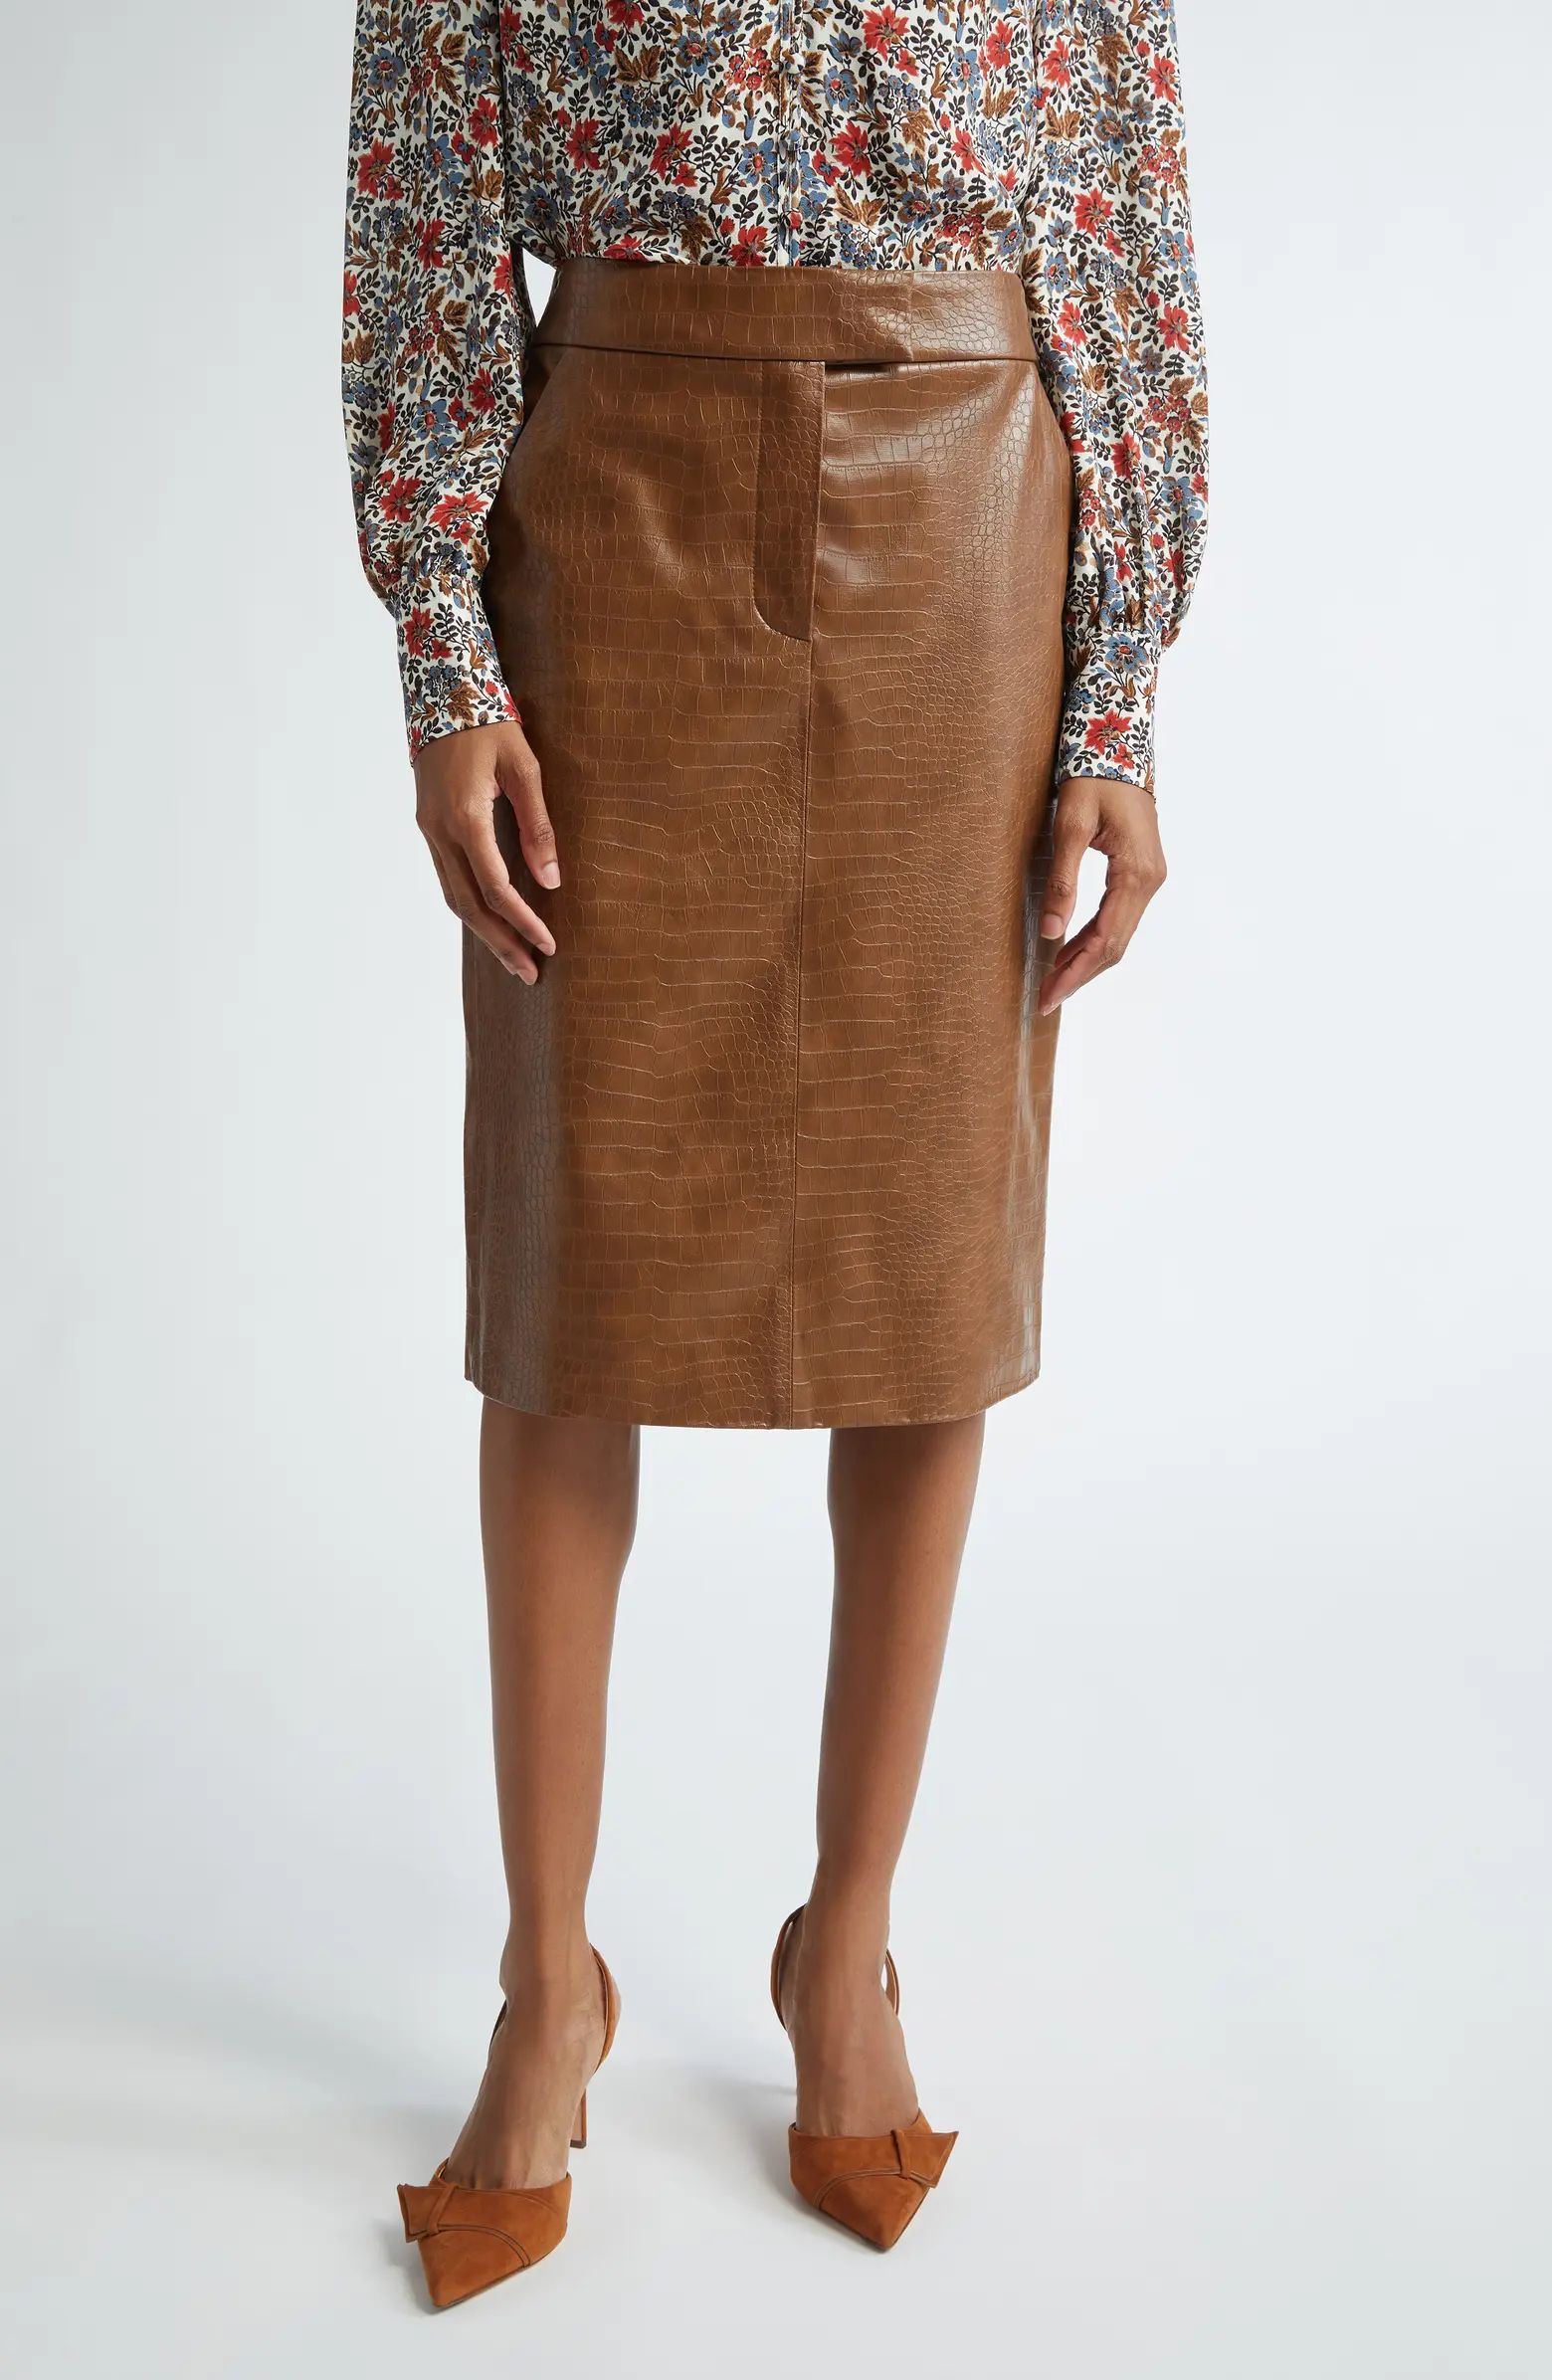 Ascher Croc Embossed Faux Leather Skirt | Nordstrom